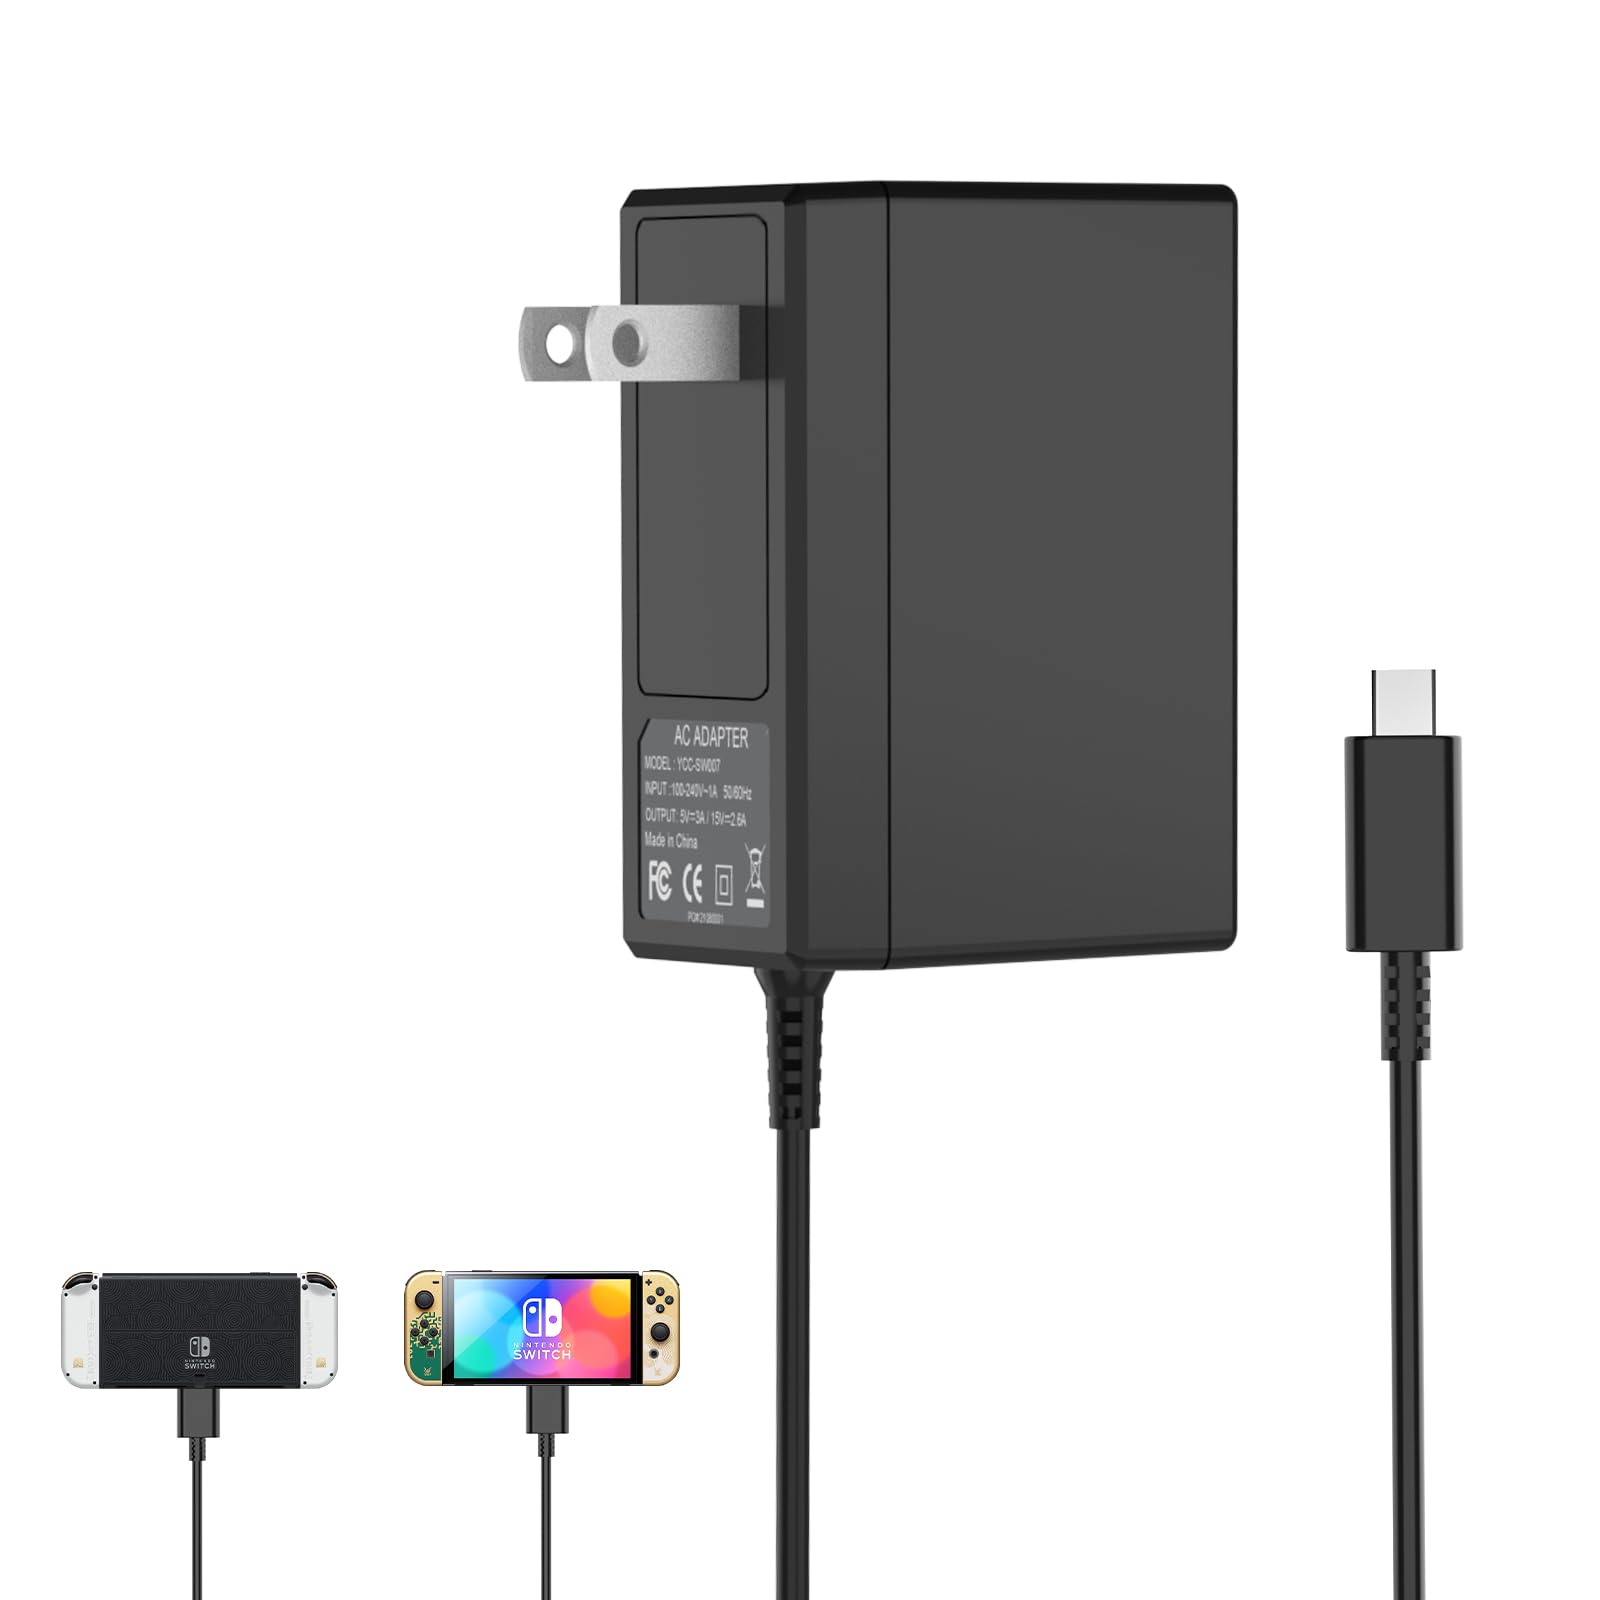 VGAME Switch Charger for Nintendo Switch/Switch OLED/Switch Lite - Fully Charged AC Power Supply Within 2.5H with 5FT USB C Cable, Compatible Android Phone and Switch Dock (Black)